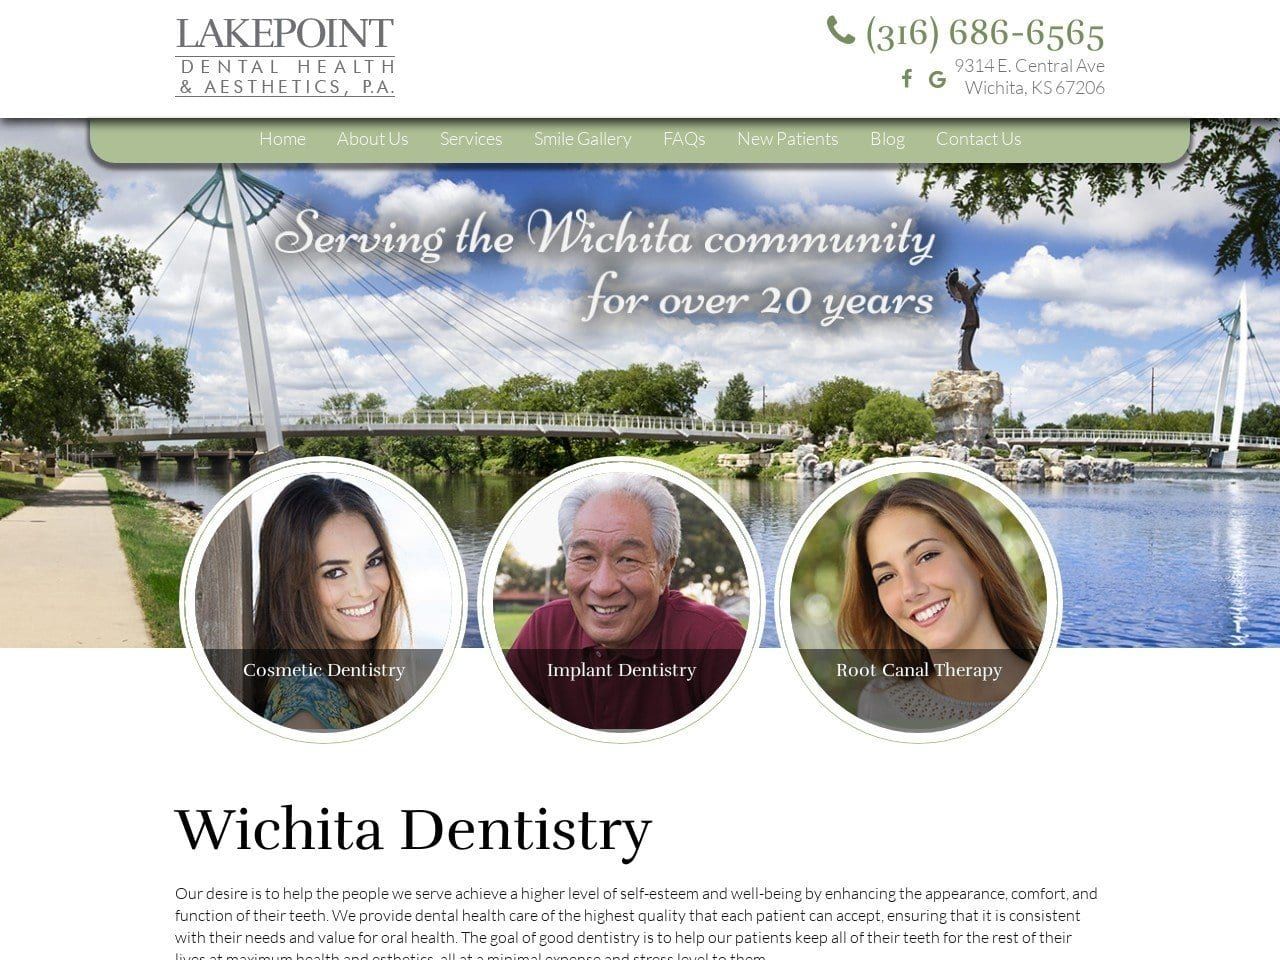 Lakepoint Dental Health And Aesthetics P.A. Drs. B Website Screenshot from thewichitadentist.com